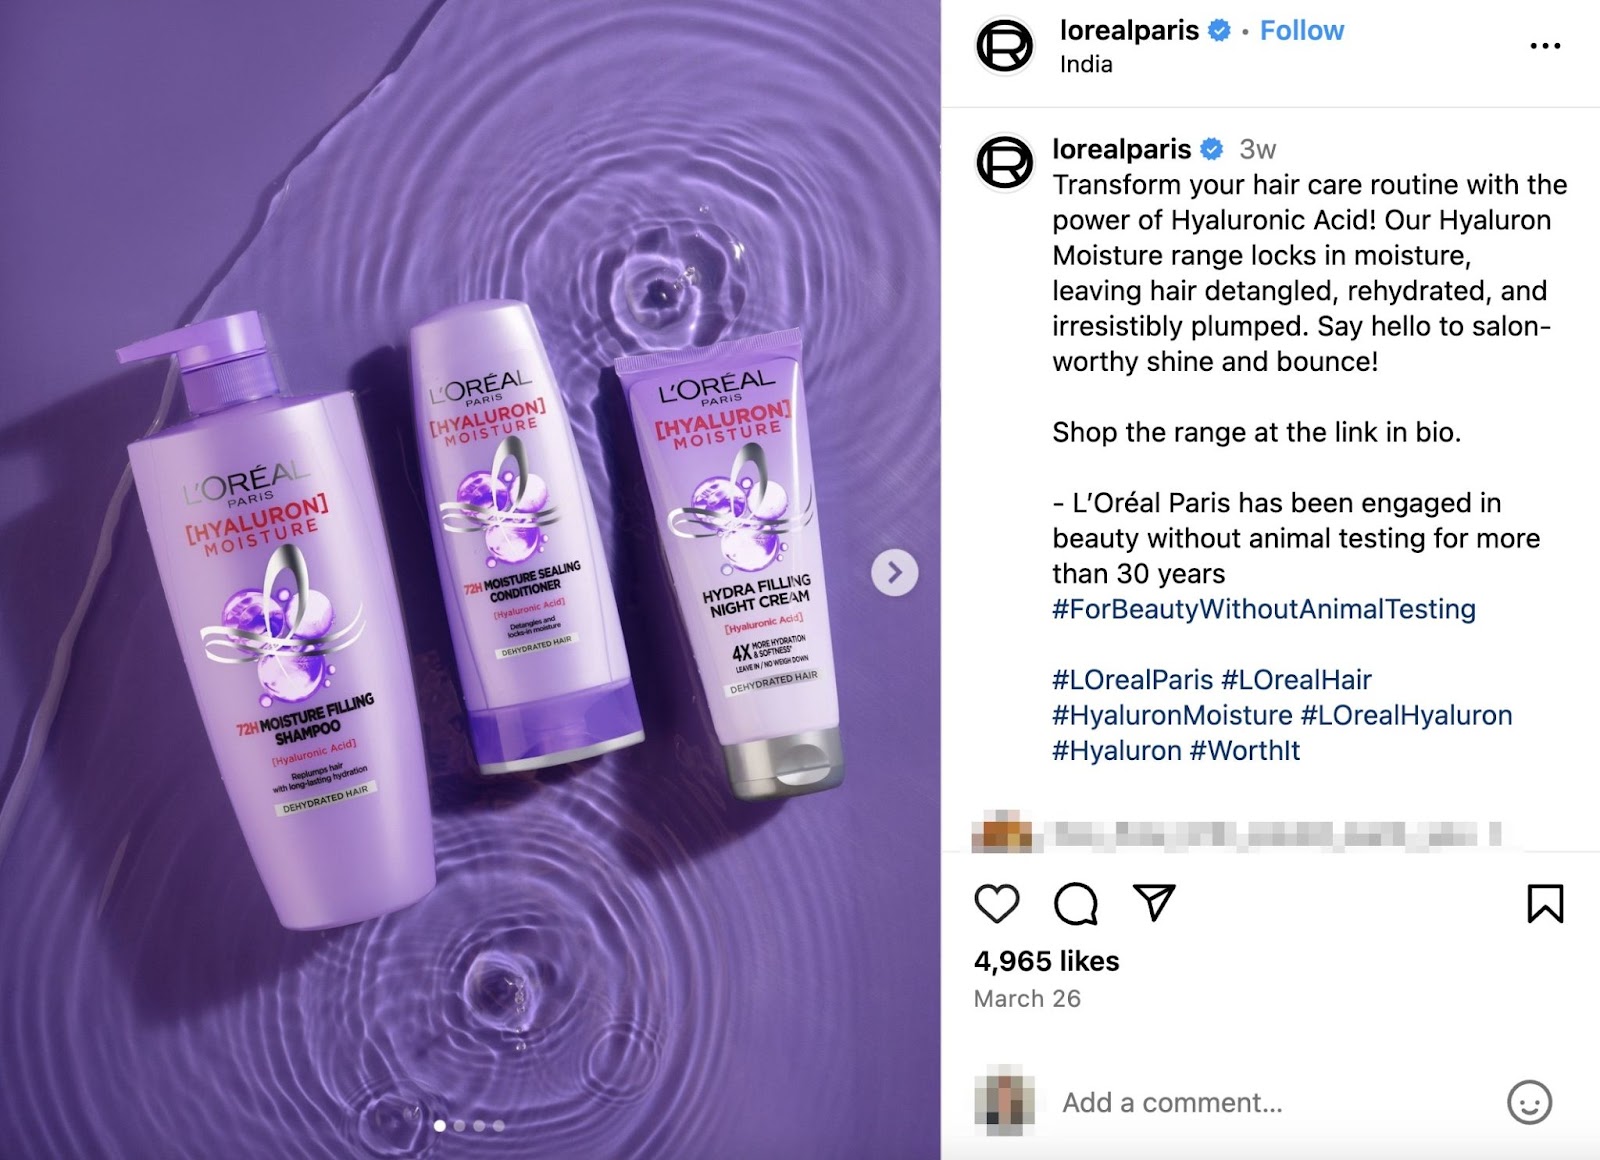 loreal instagram product post for their hyaluronic hair care line